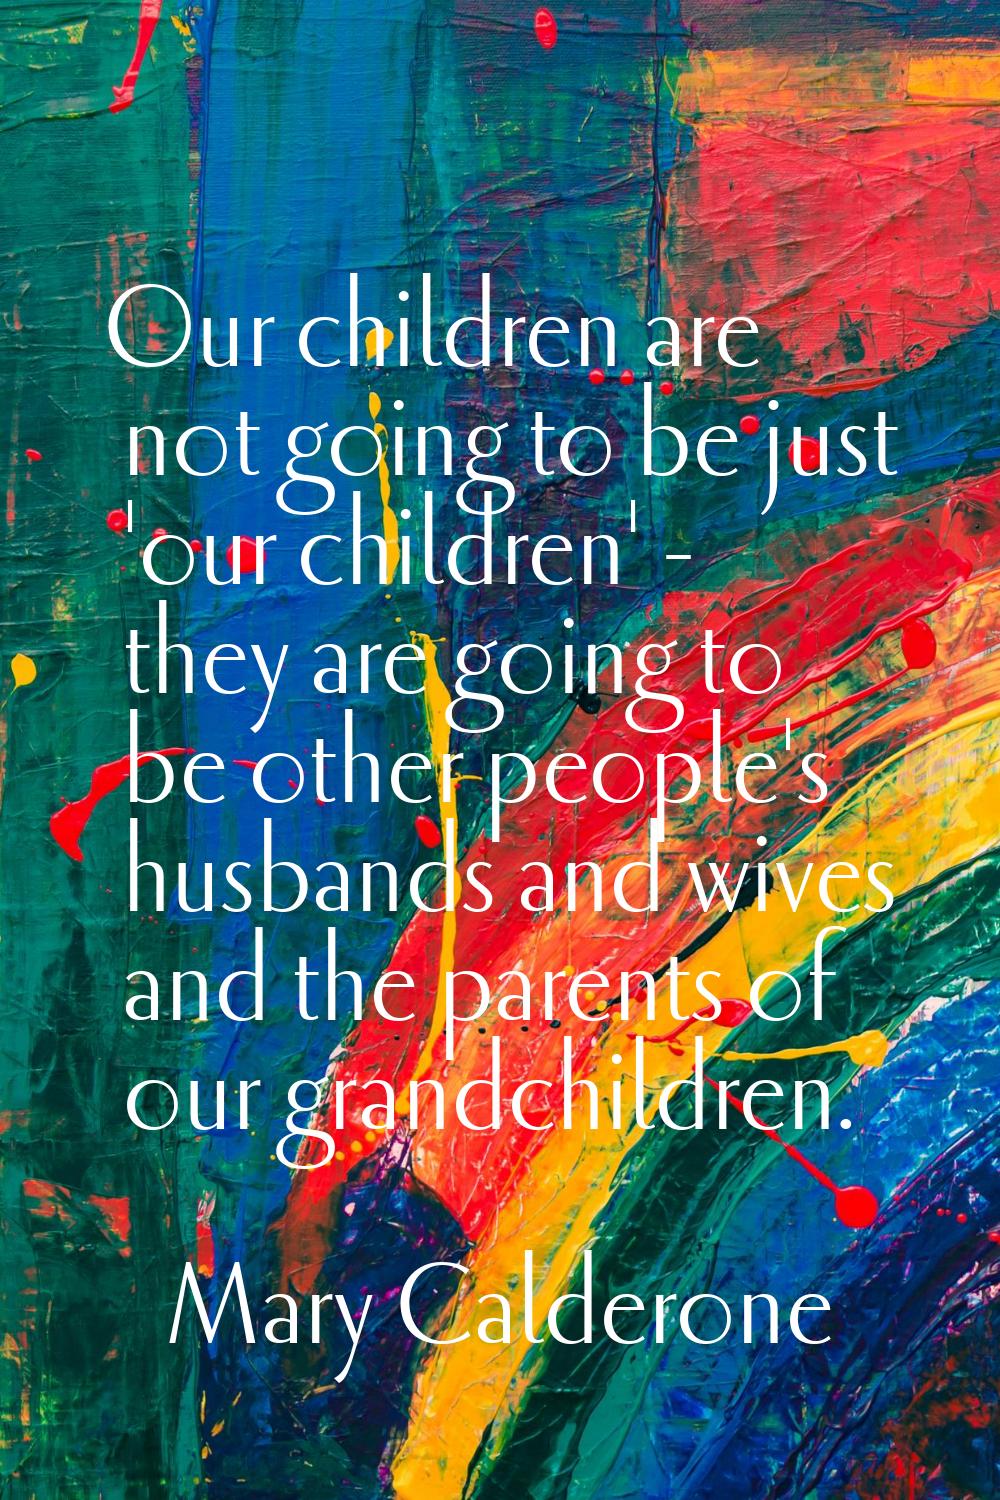 Our children are not going to be just 'our children' - they are going to be other people's husbands